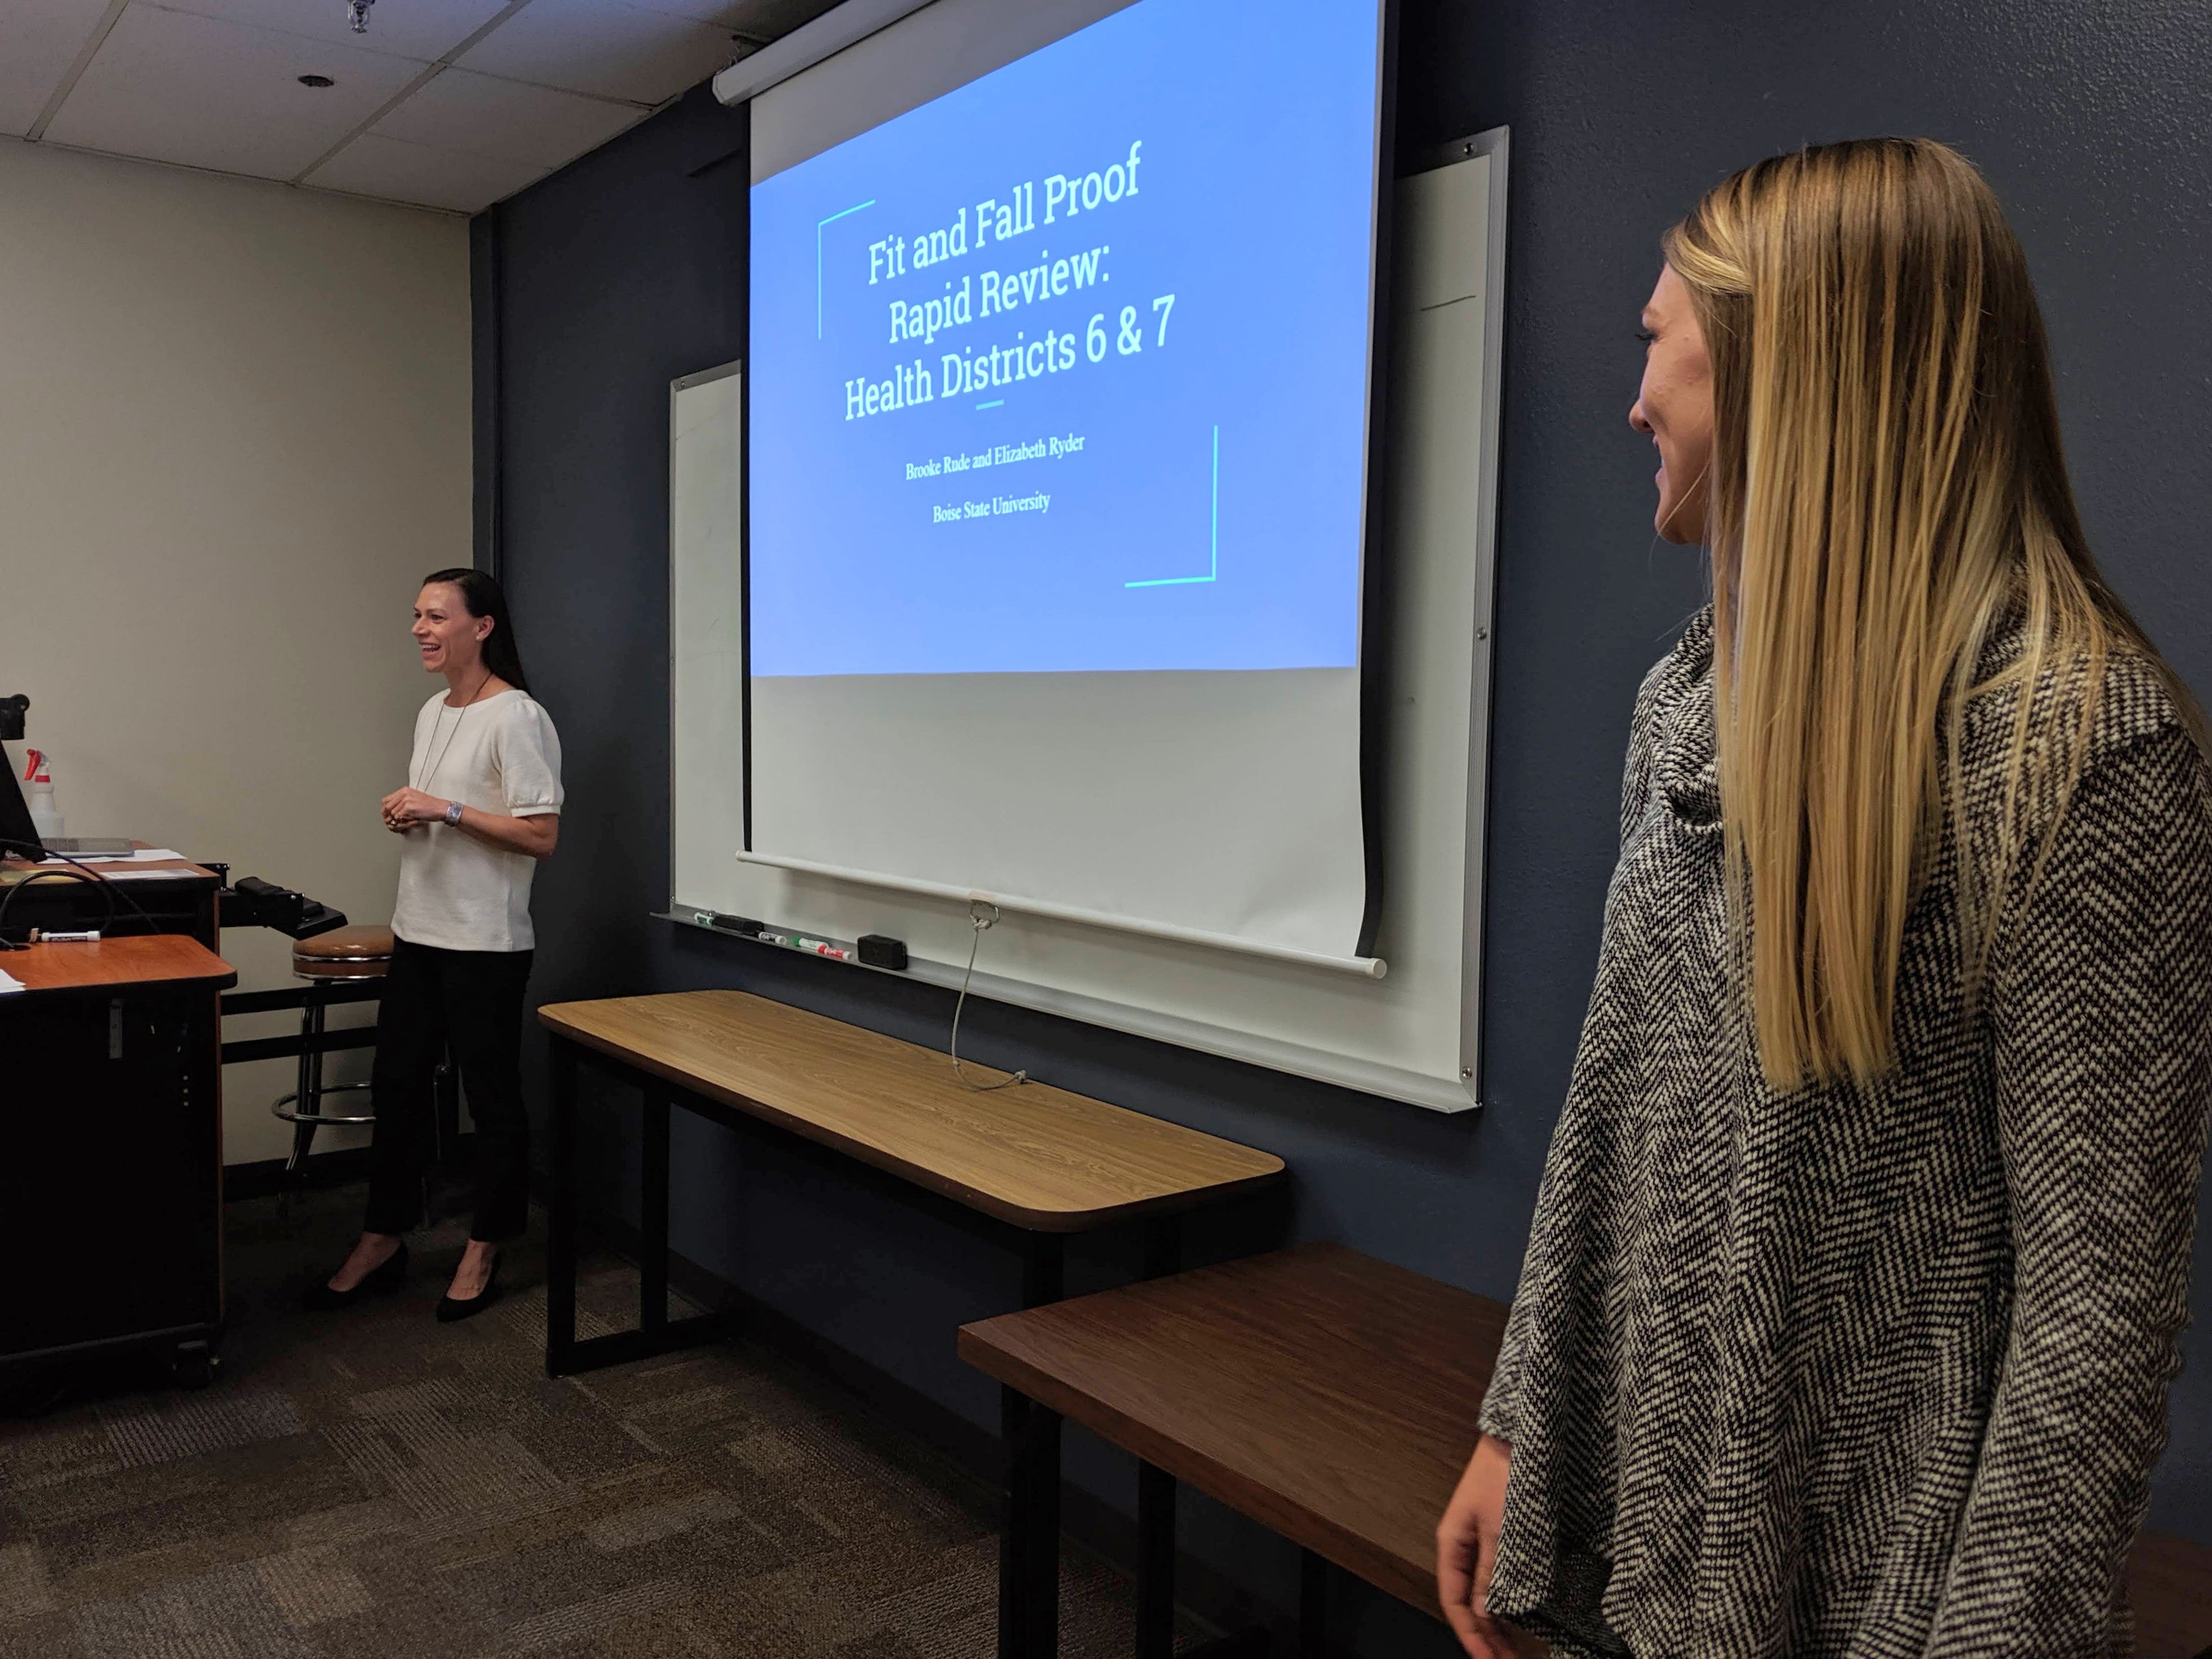 Students Elizabeth Ryder (left) and Brooke Rude (right) present their findings on Health Districts 6 and 7.